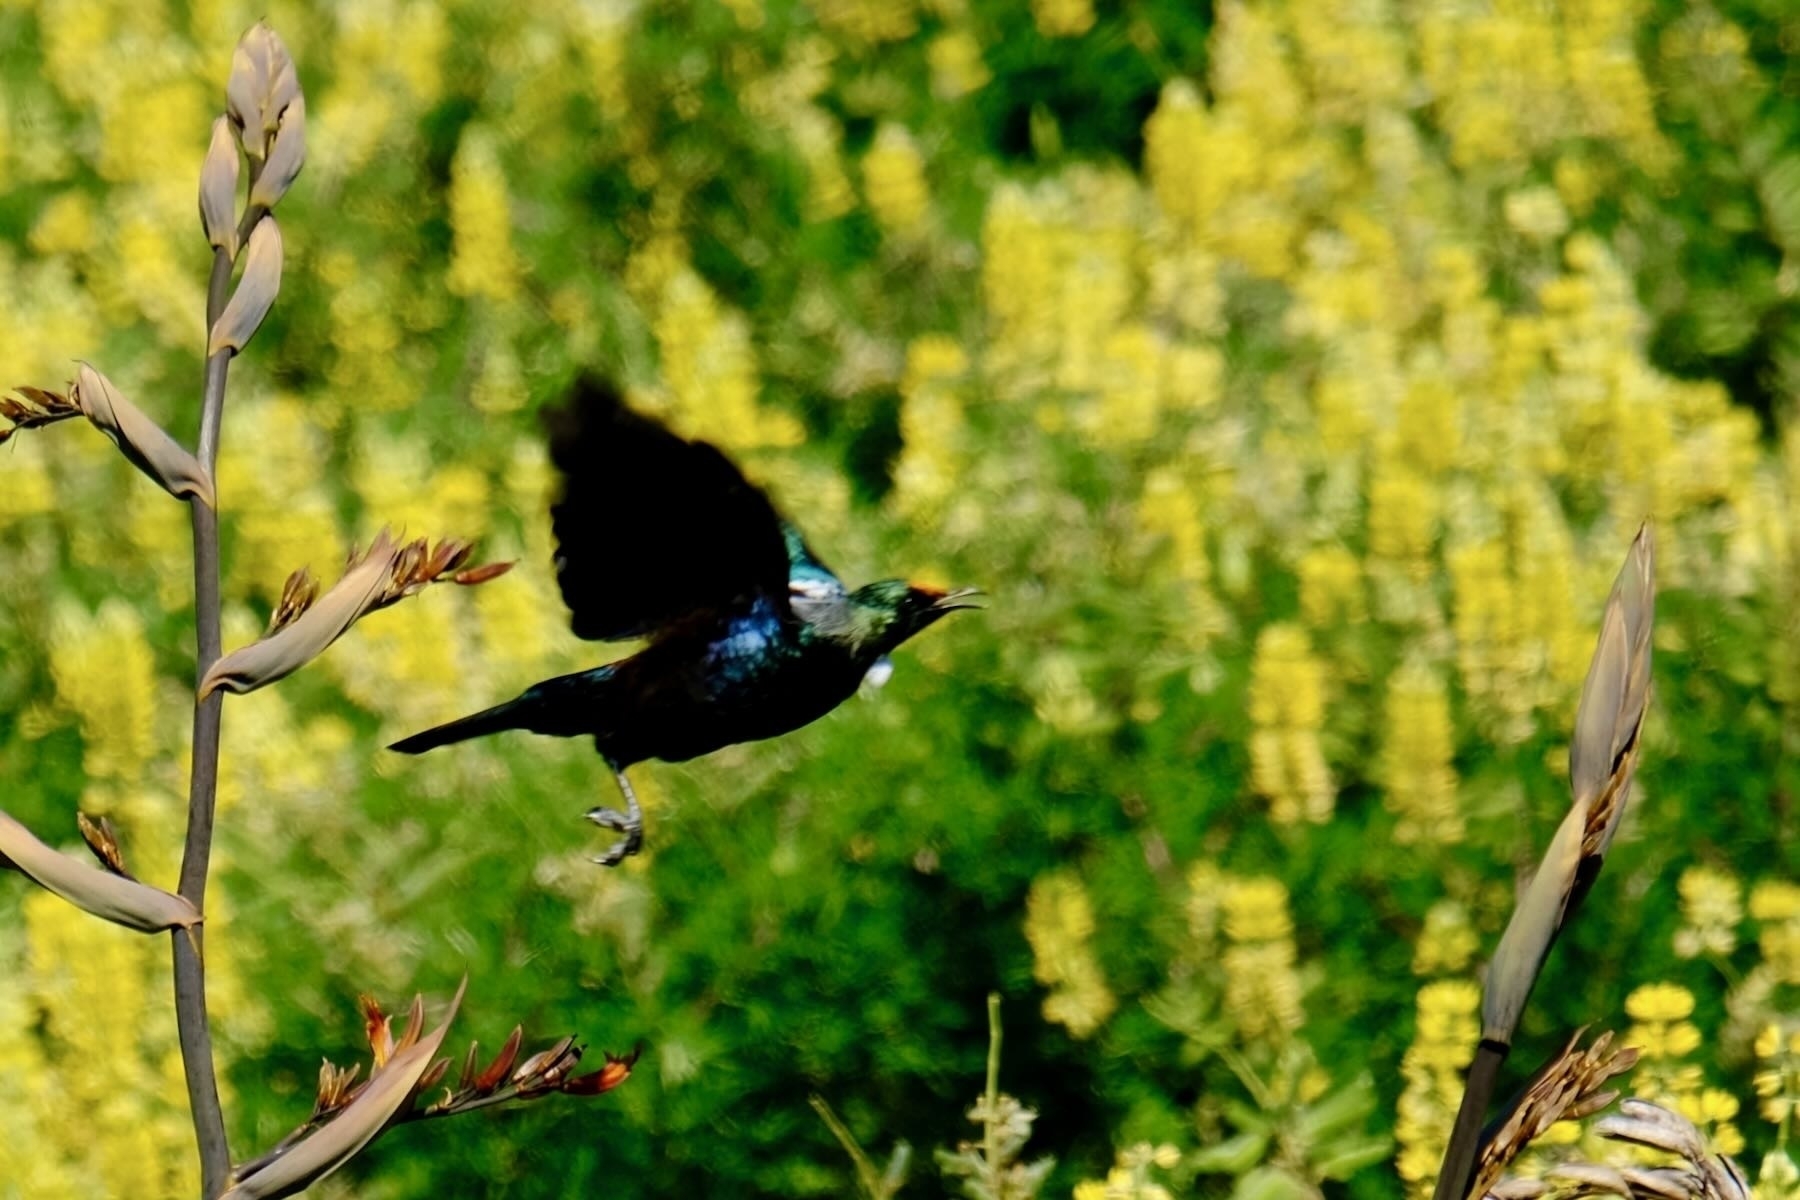 Tui in flight with yellow lupins behind. 